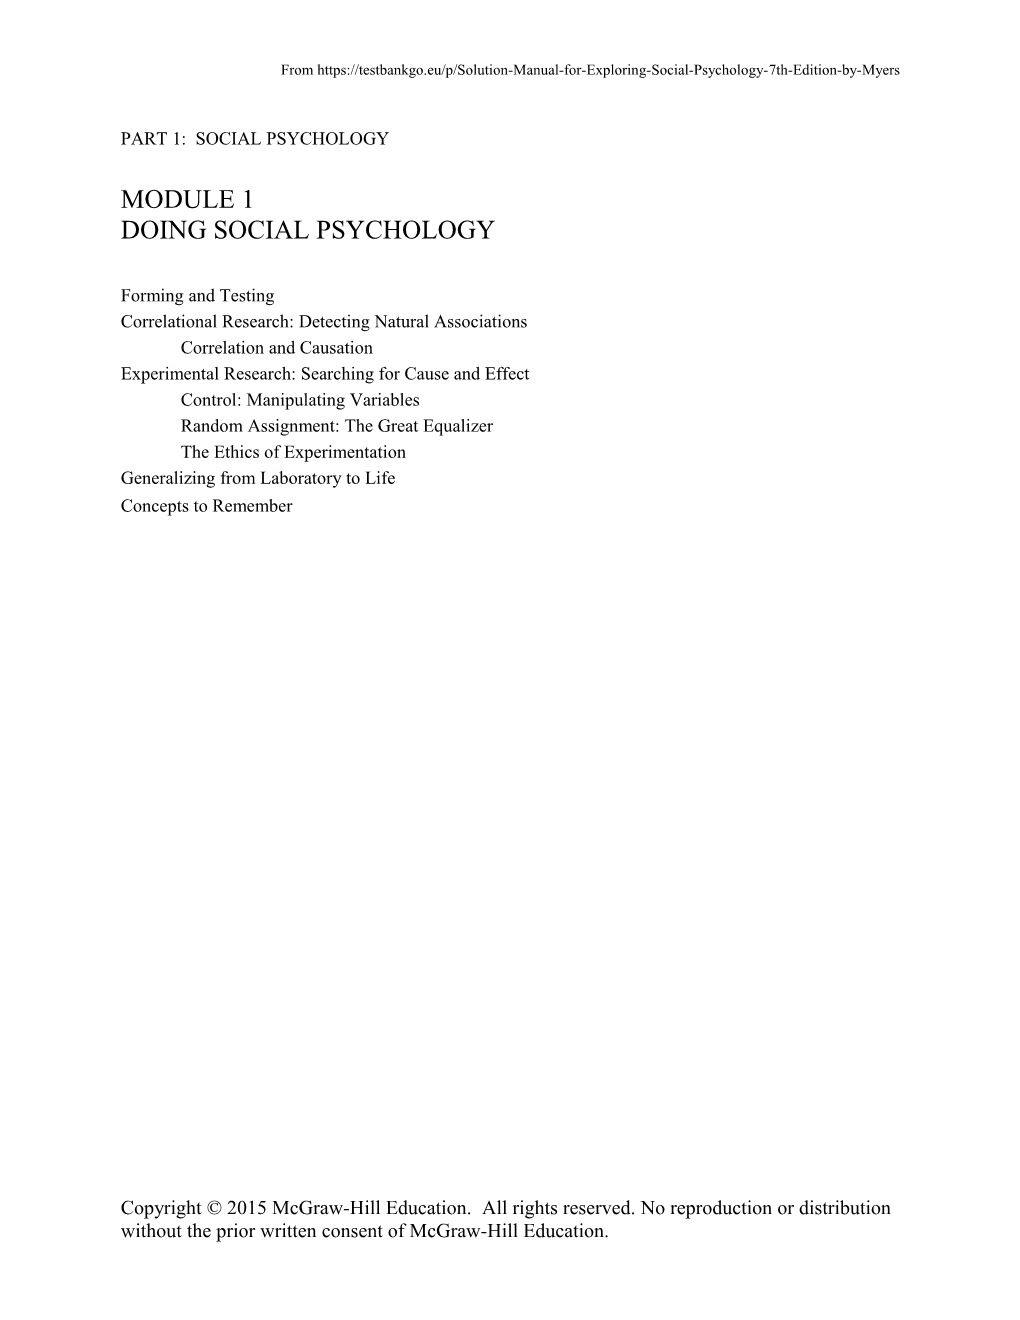 Chapter 1: Introducing Social Psychology